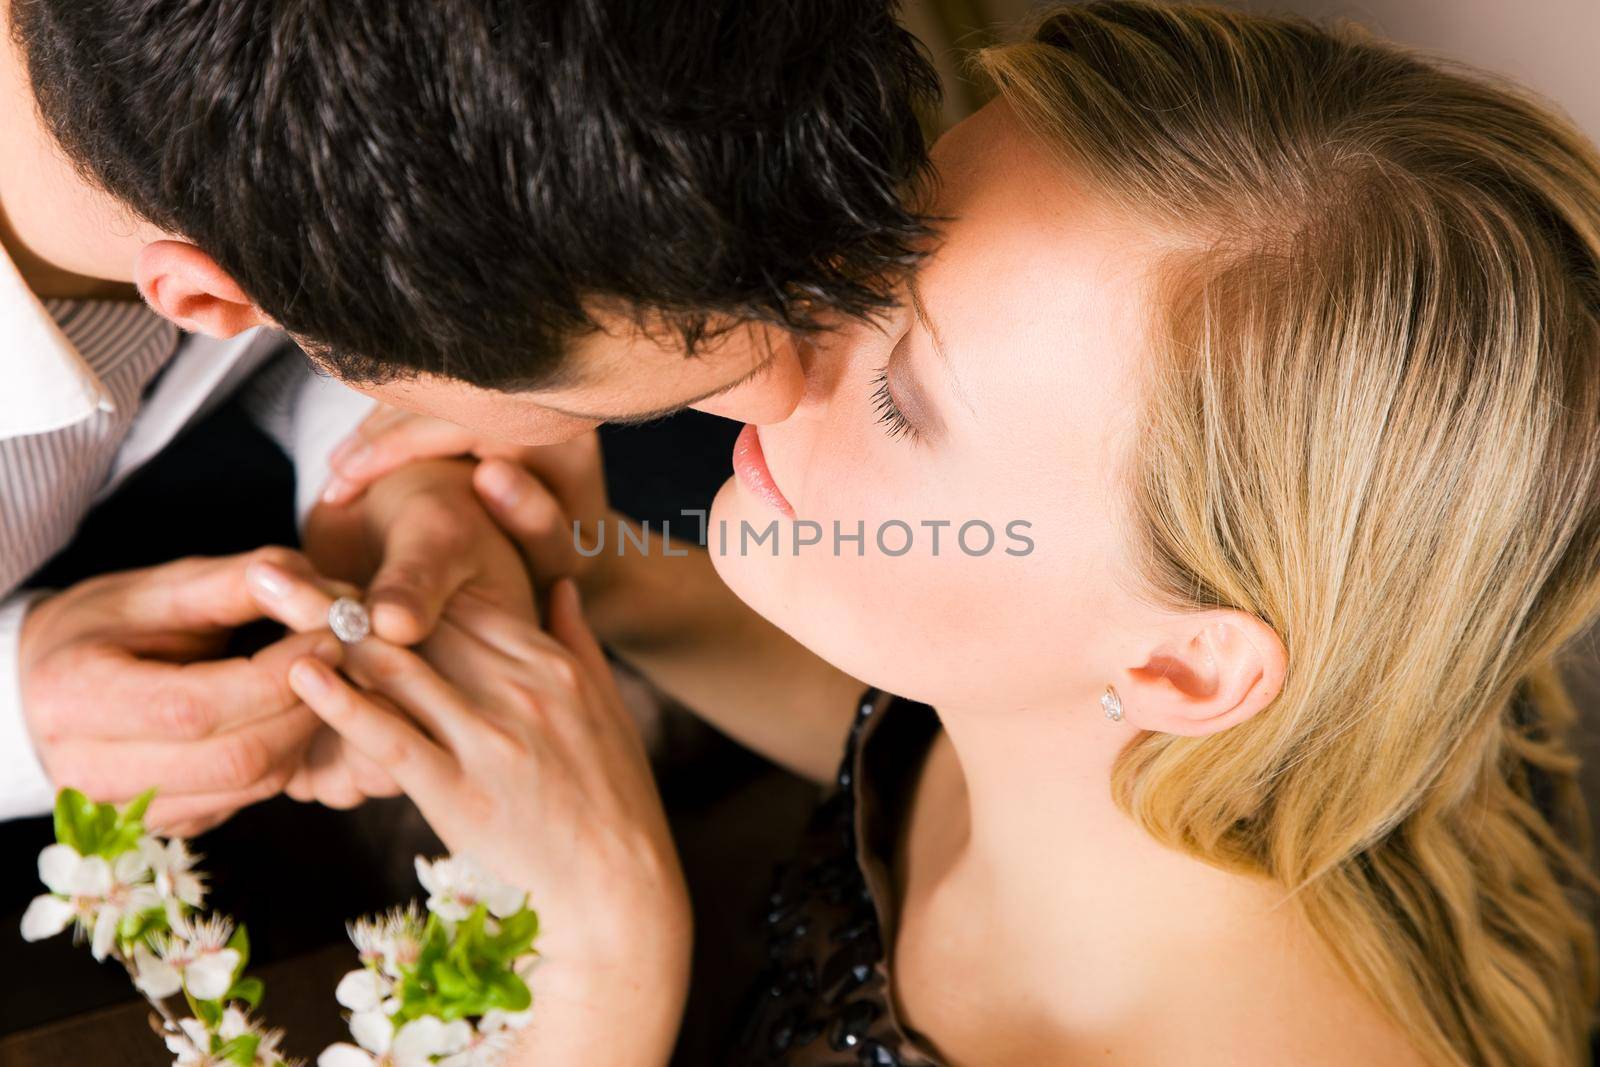 He is offering her the ring, she seems to be accepting with a kiss; focus on eyes